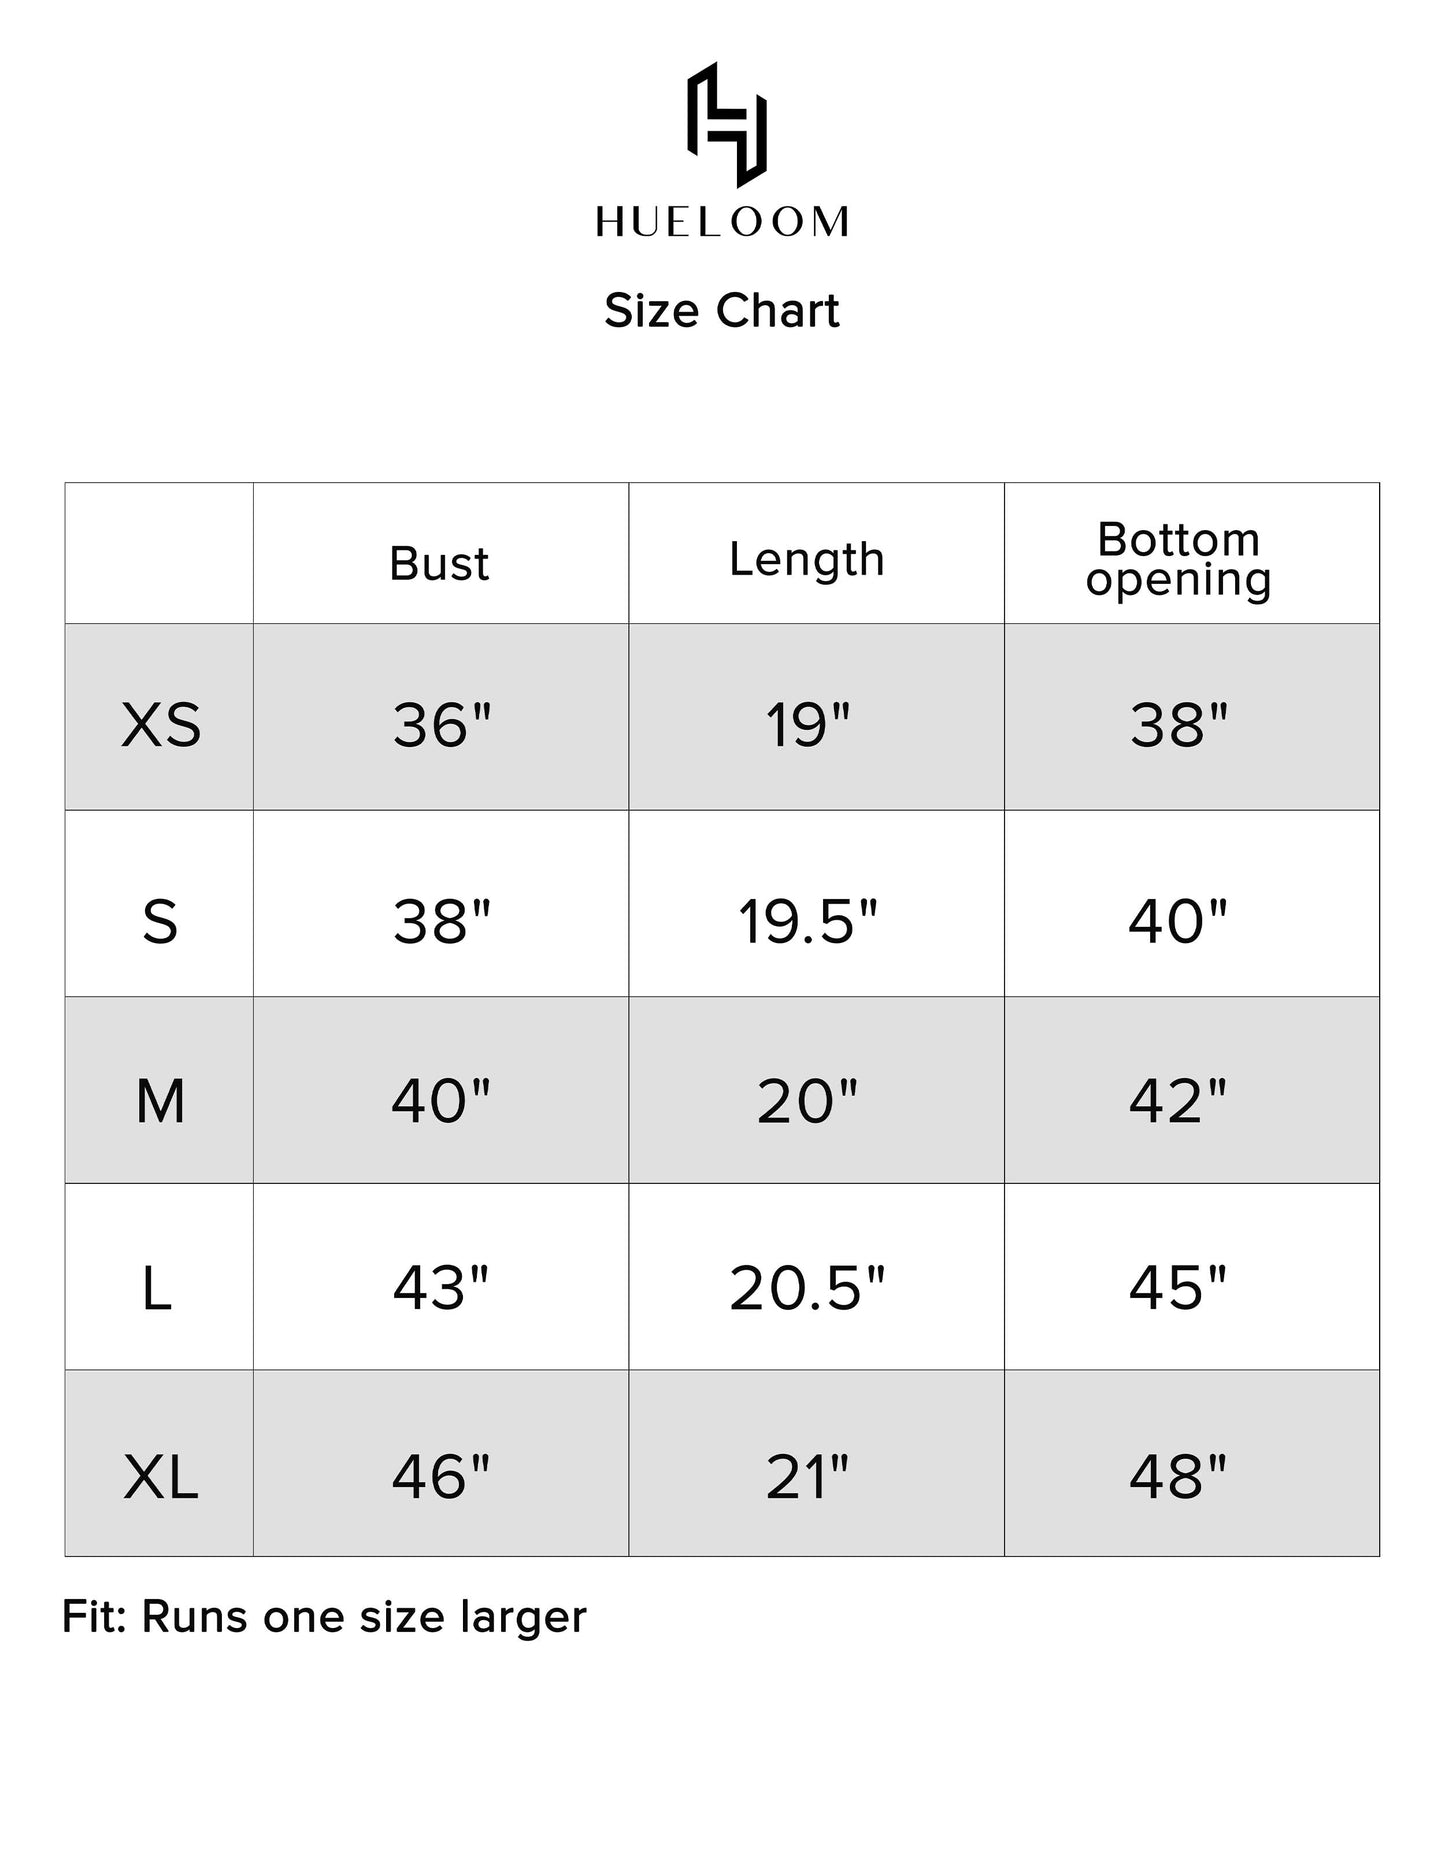 Hueloom Verso Reversible Top size chart display for accurate sizing.